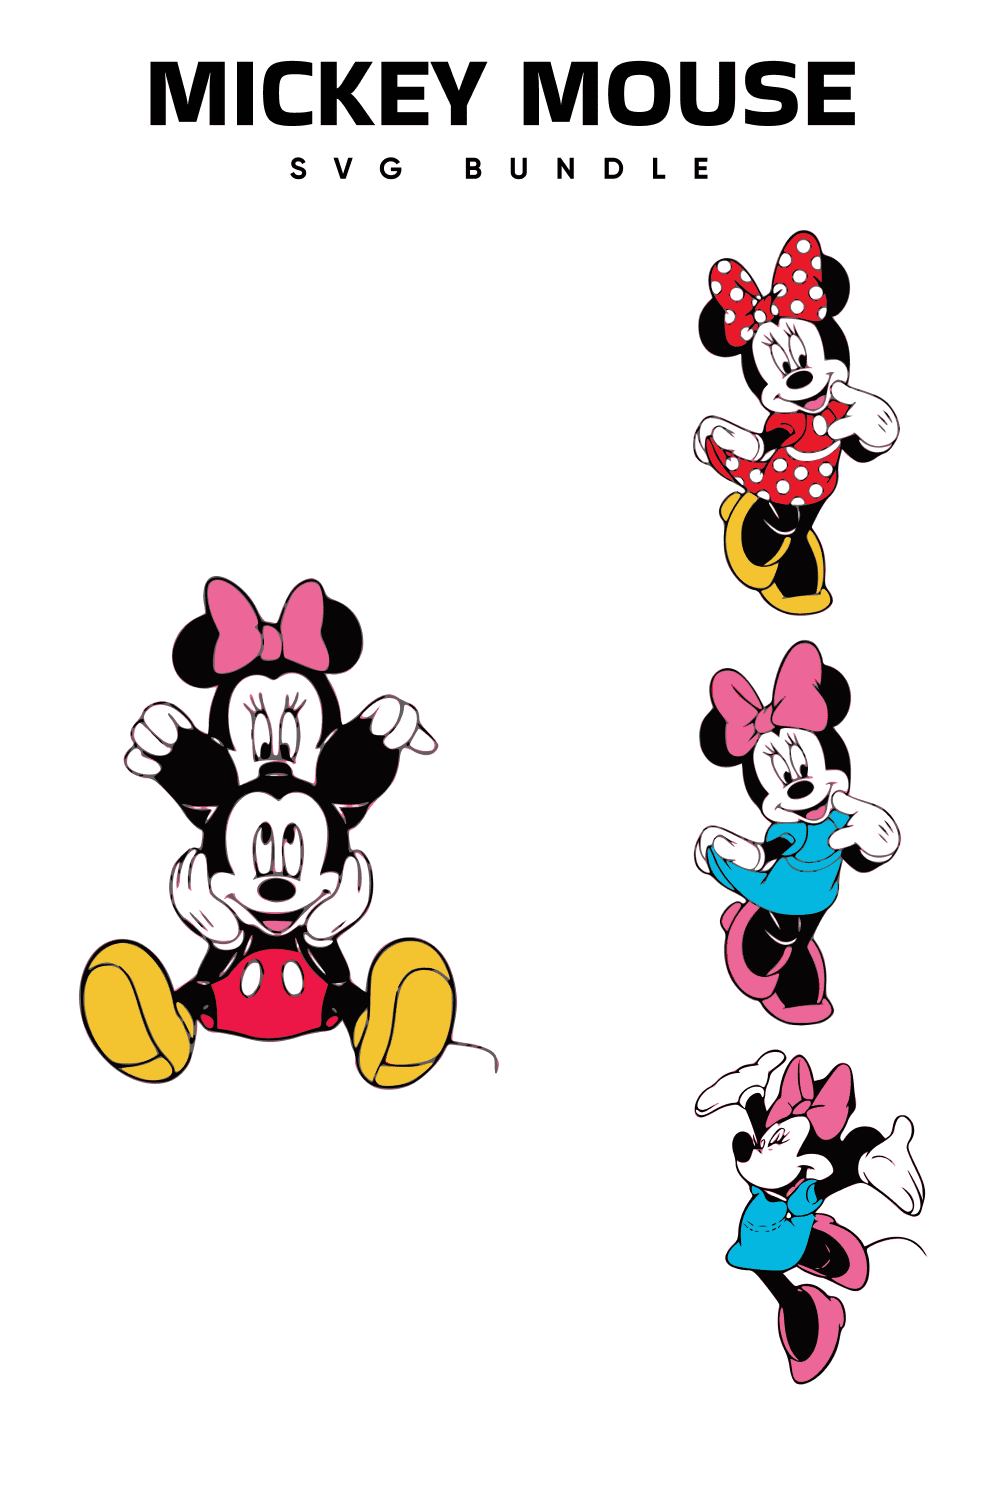 Set of irresistible minnie mouse images.